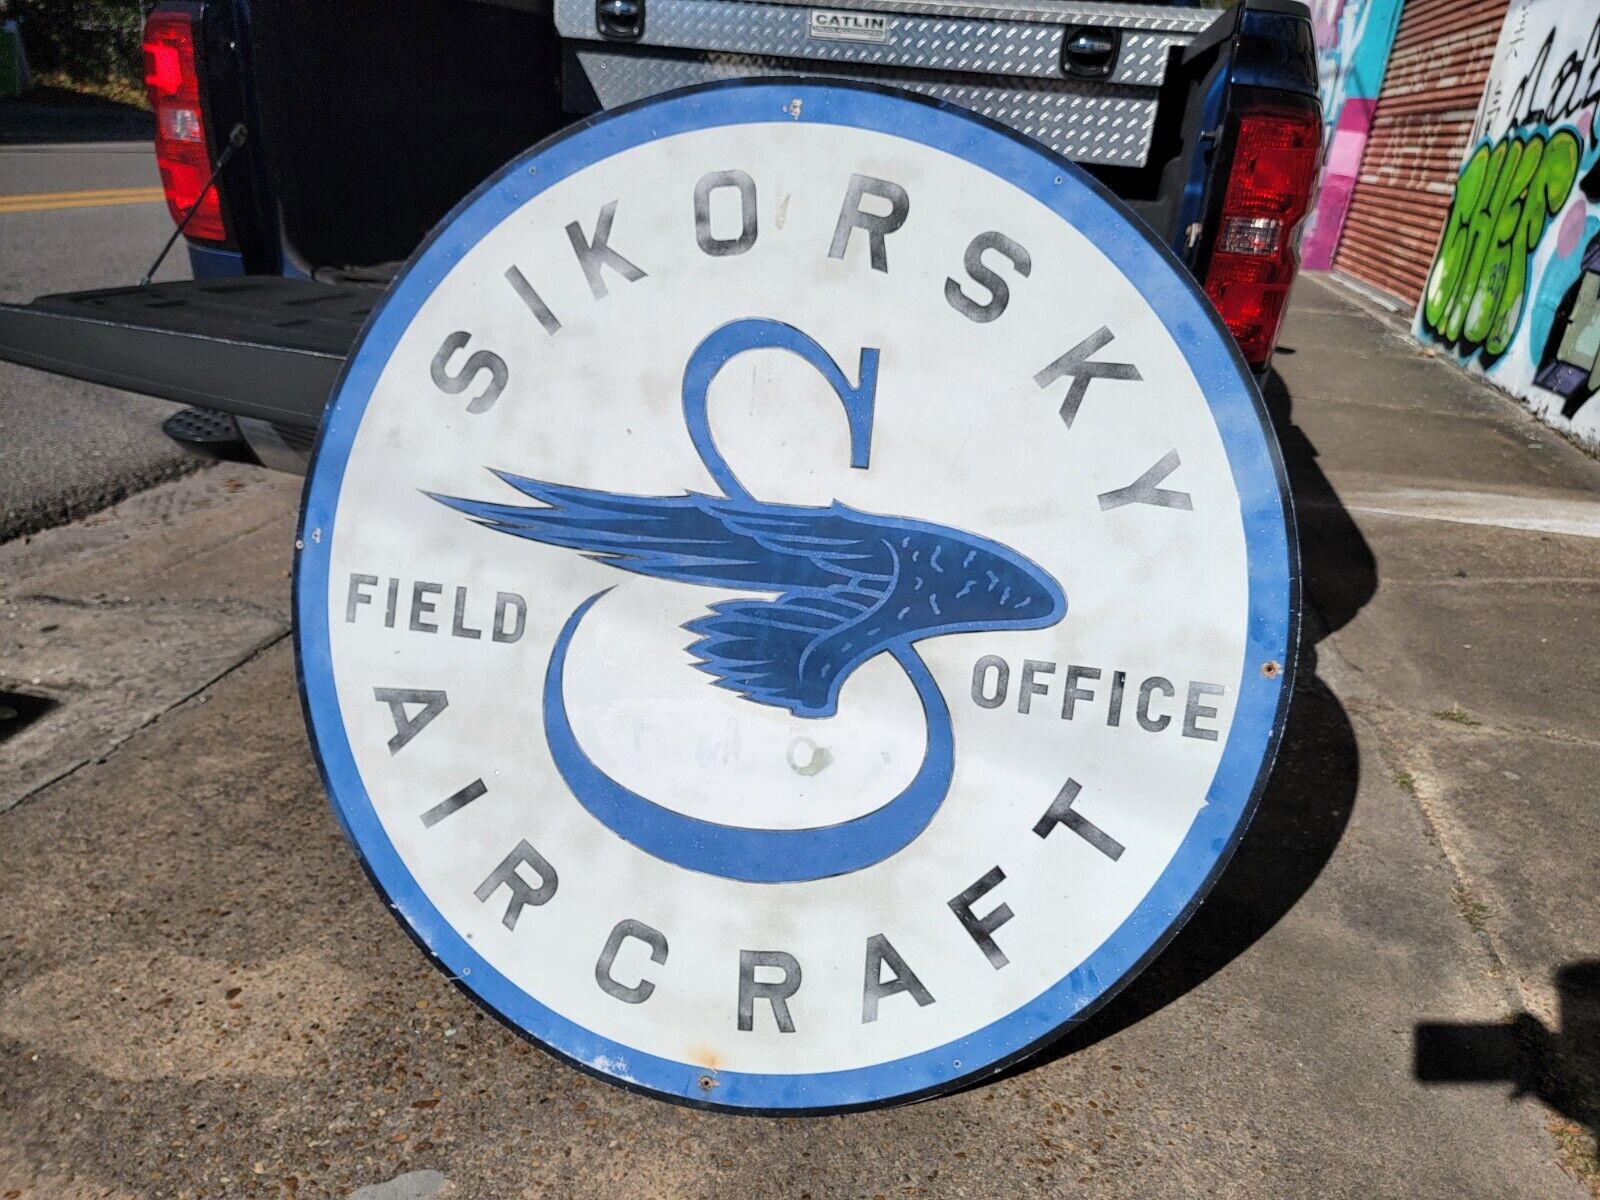 Sikorsky Aircraft Airplane Airport Lockheed Martin Sign Helicopter Military 